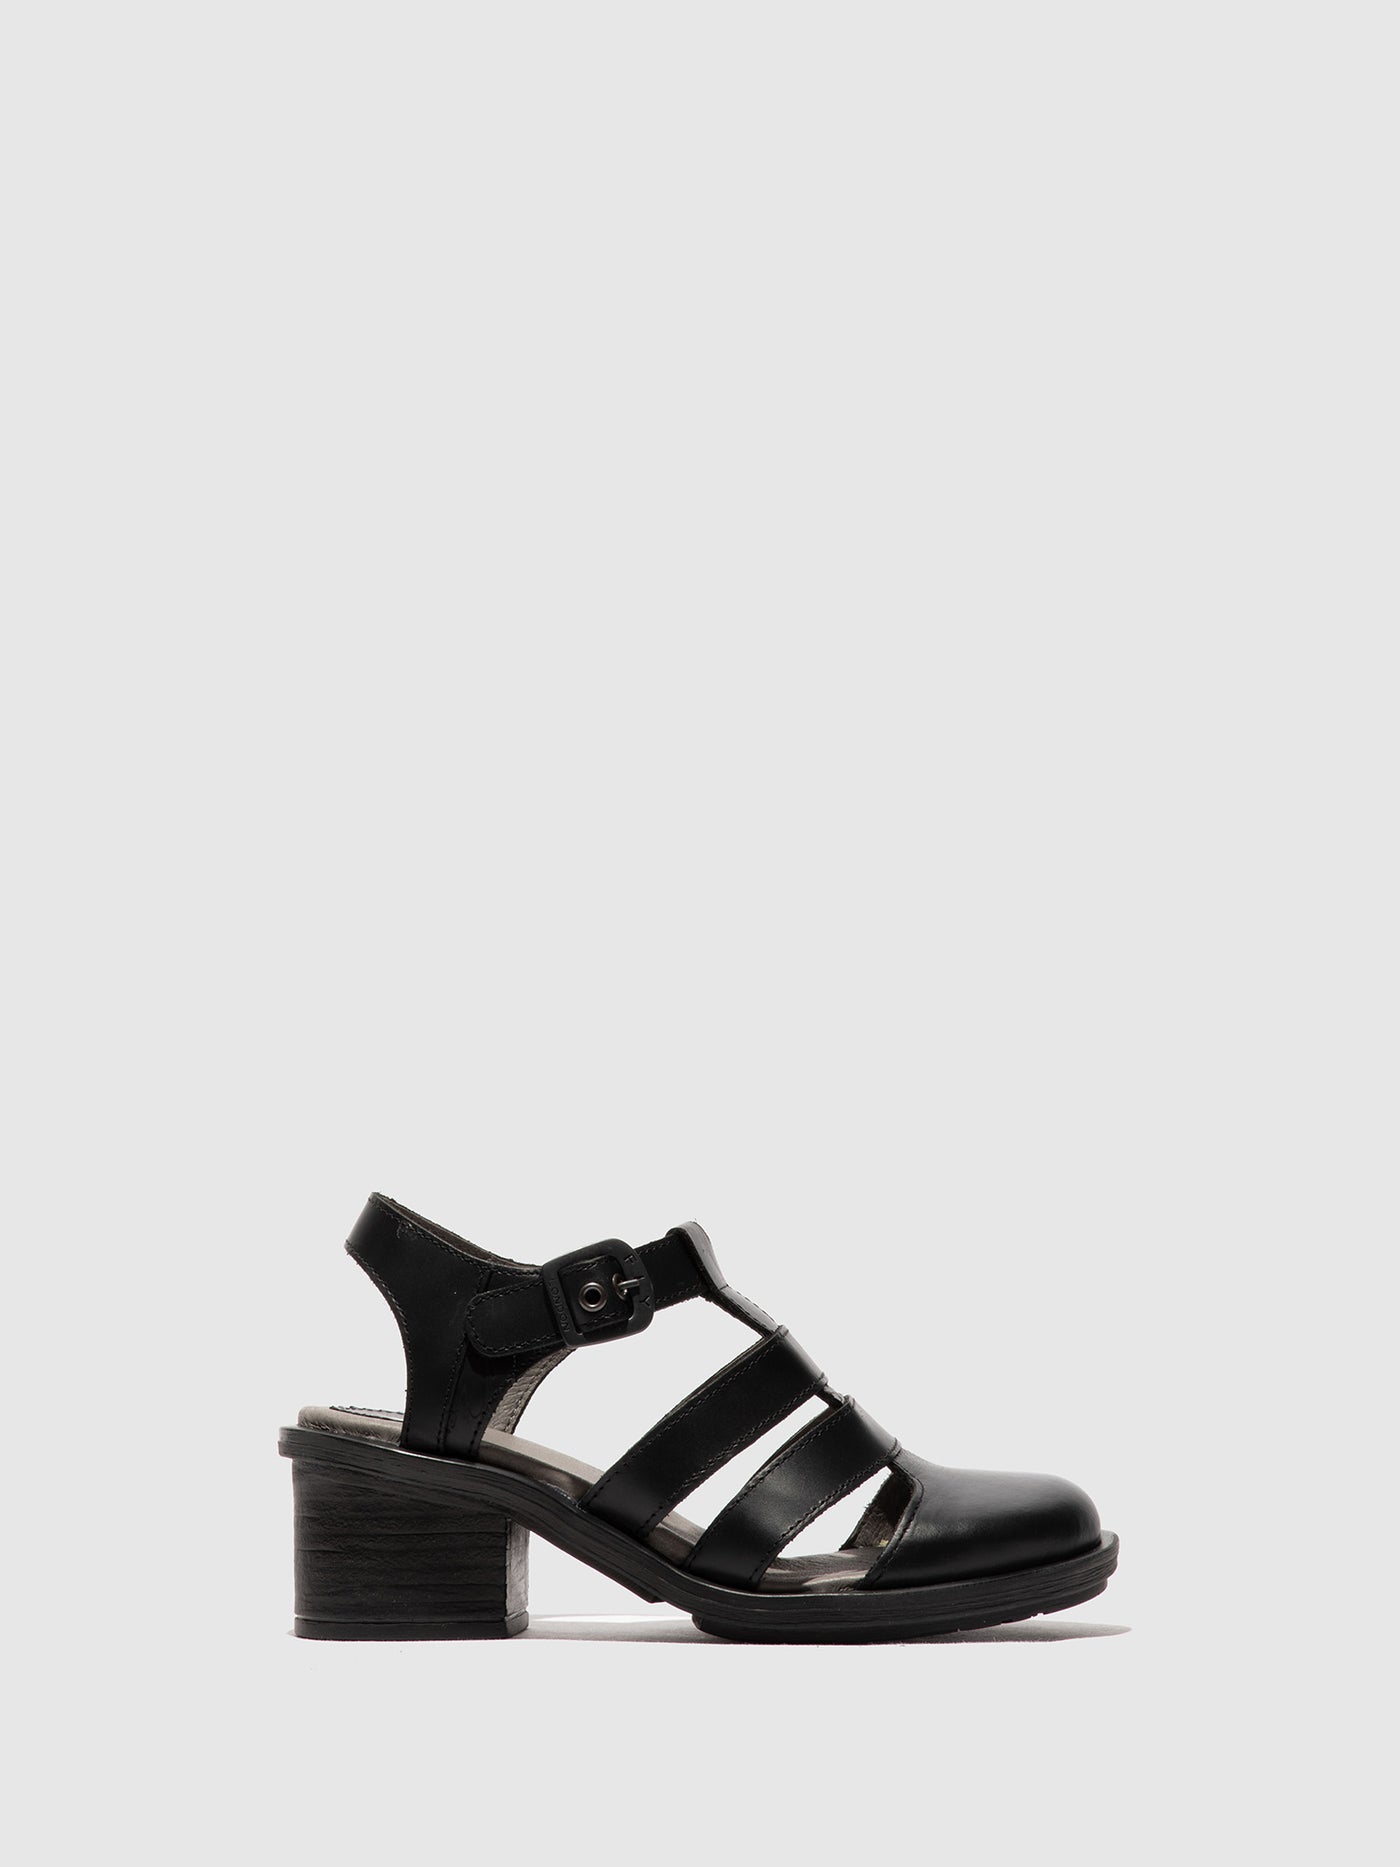 T-Strap Sandals CAHY195FLY BLACK